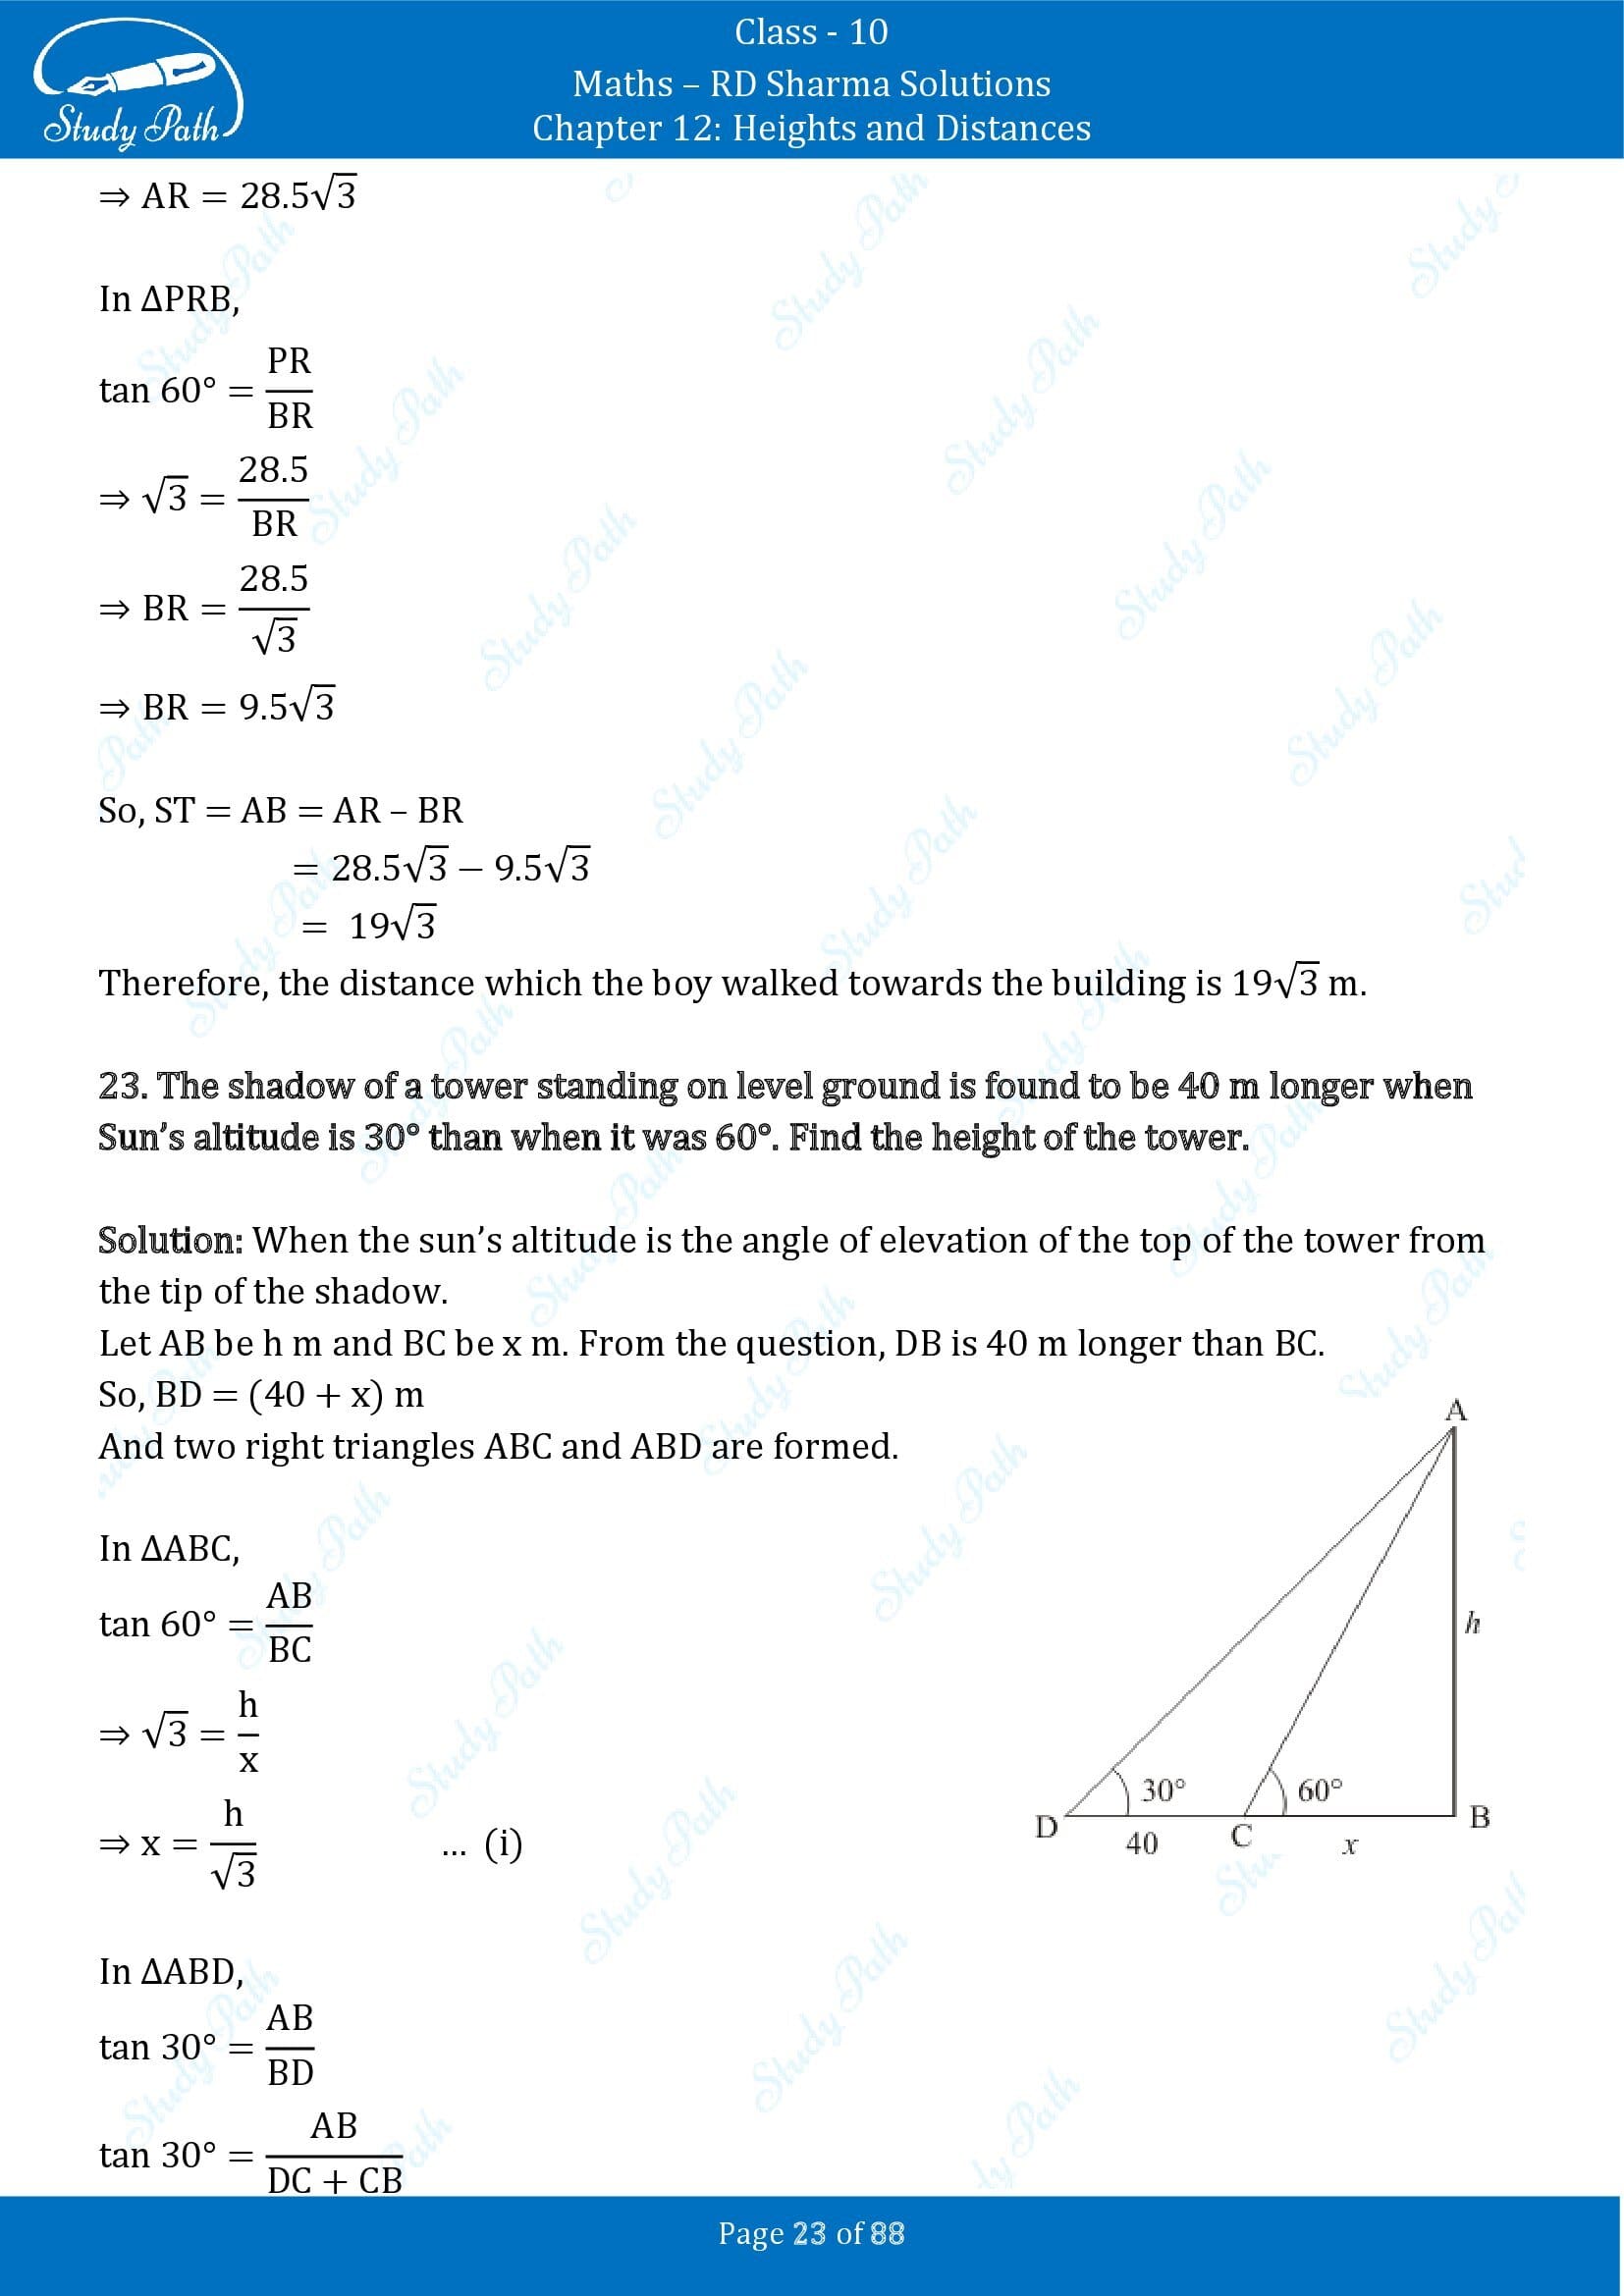 RD Sharma Solutions Class 10 Chapter 12 Heights and Distances Exercise 12.1 00023